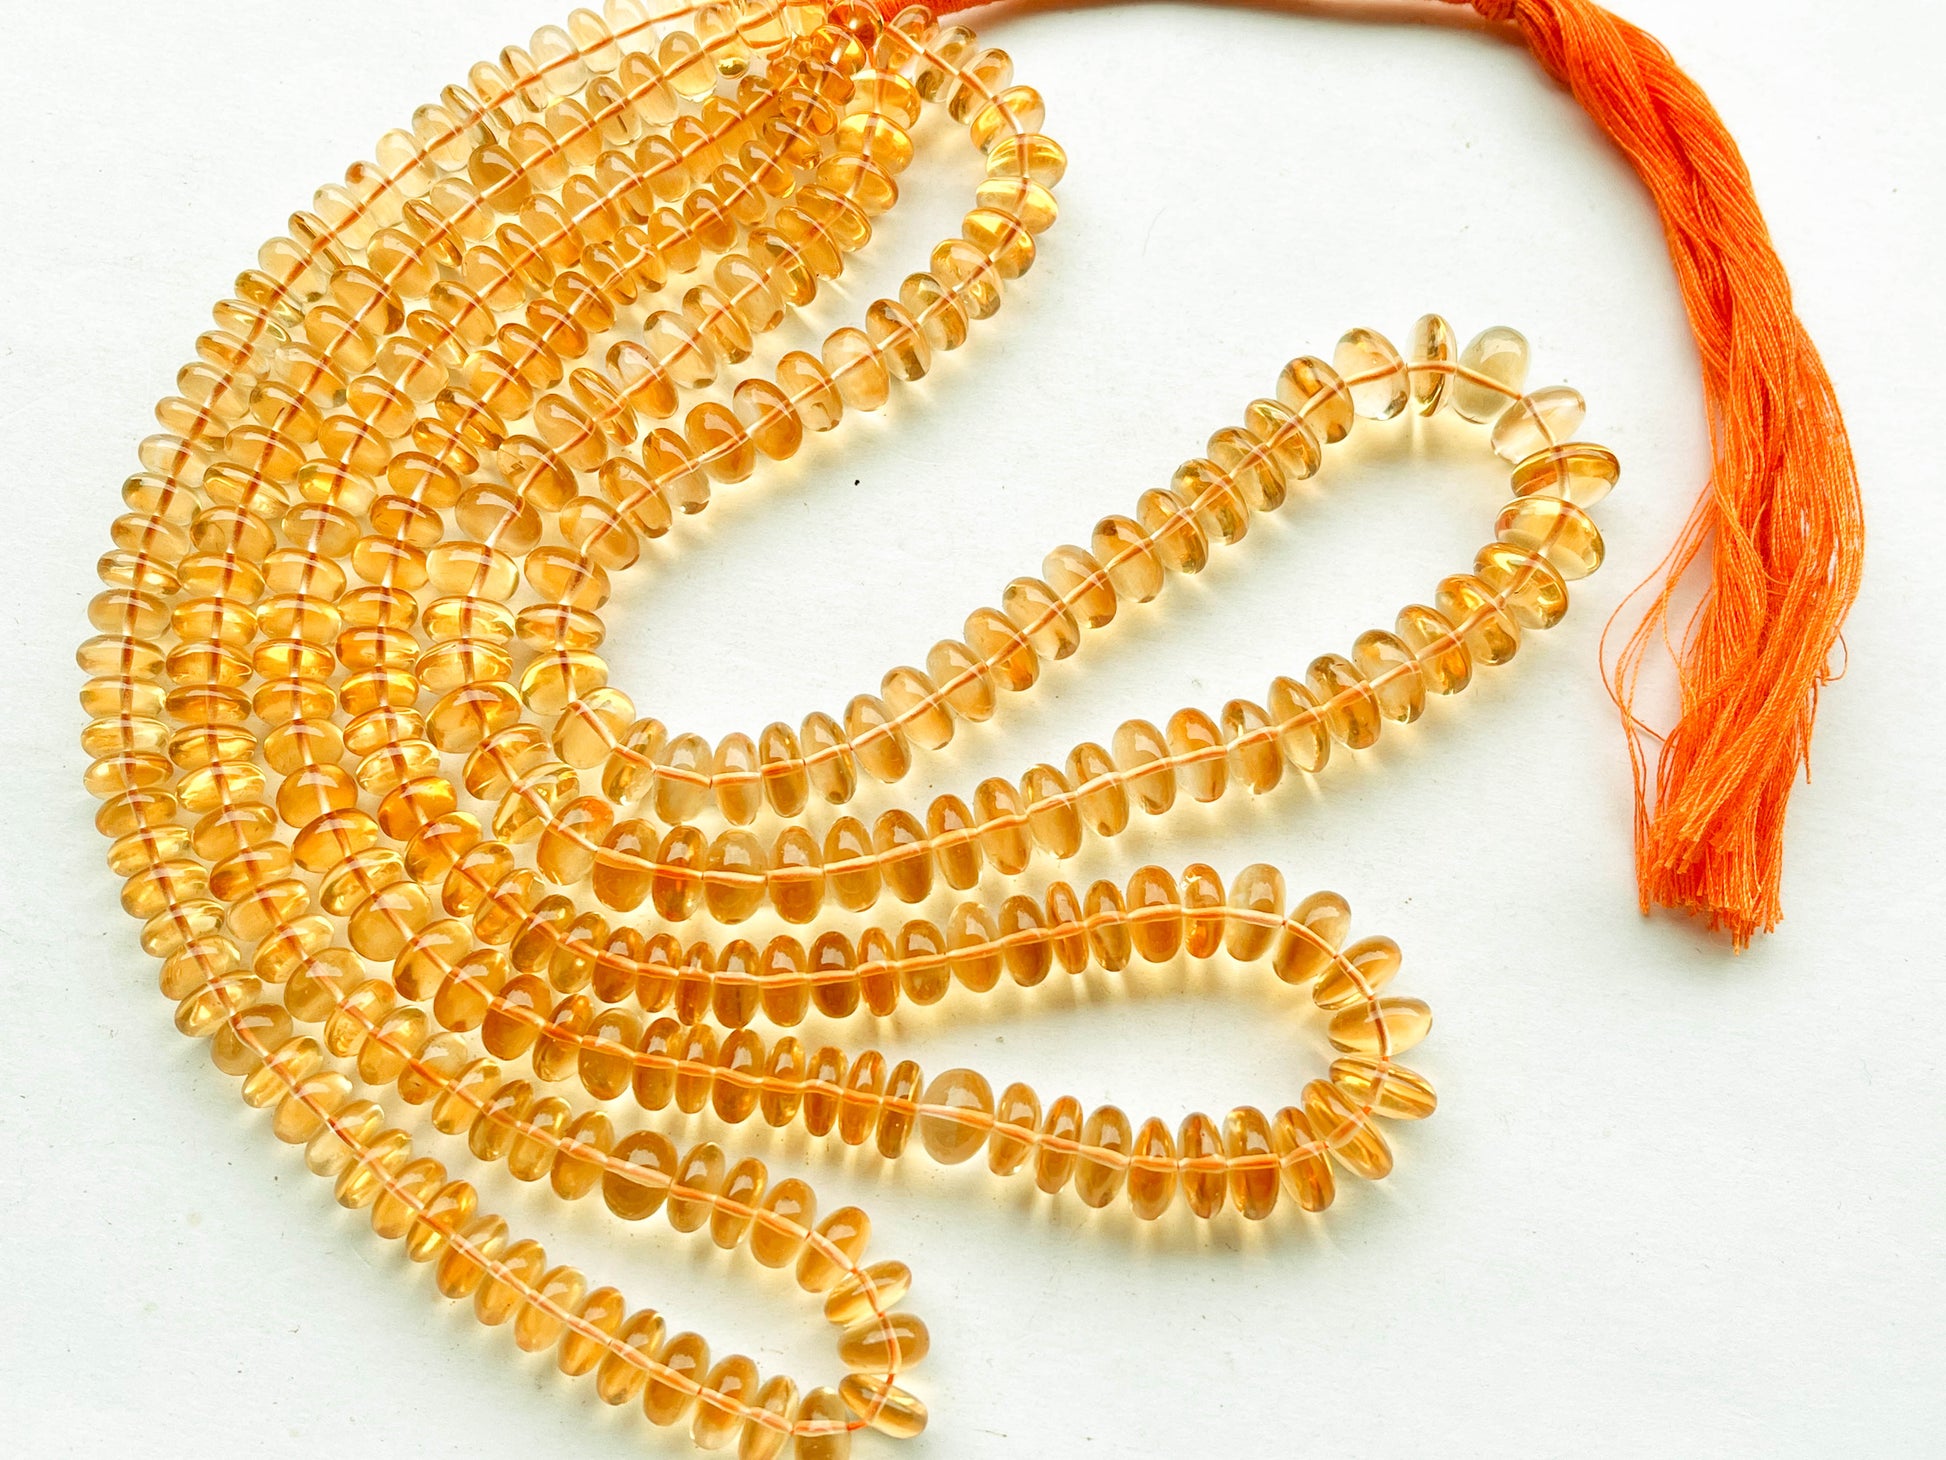 AAA Citrine Smooth Rondelle Beads, 16 Inch | 7mm to 10mm Beadsforyourjewelry